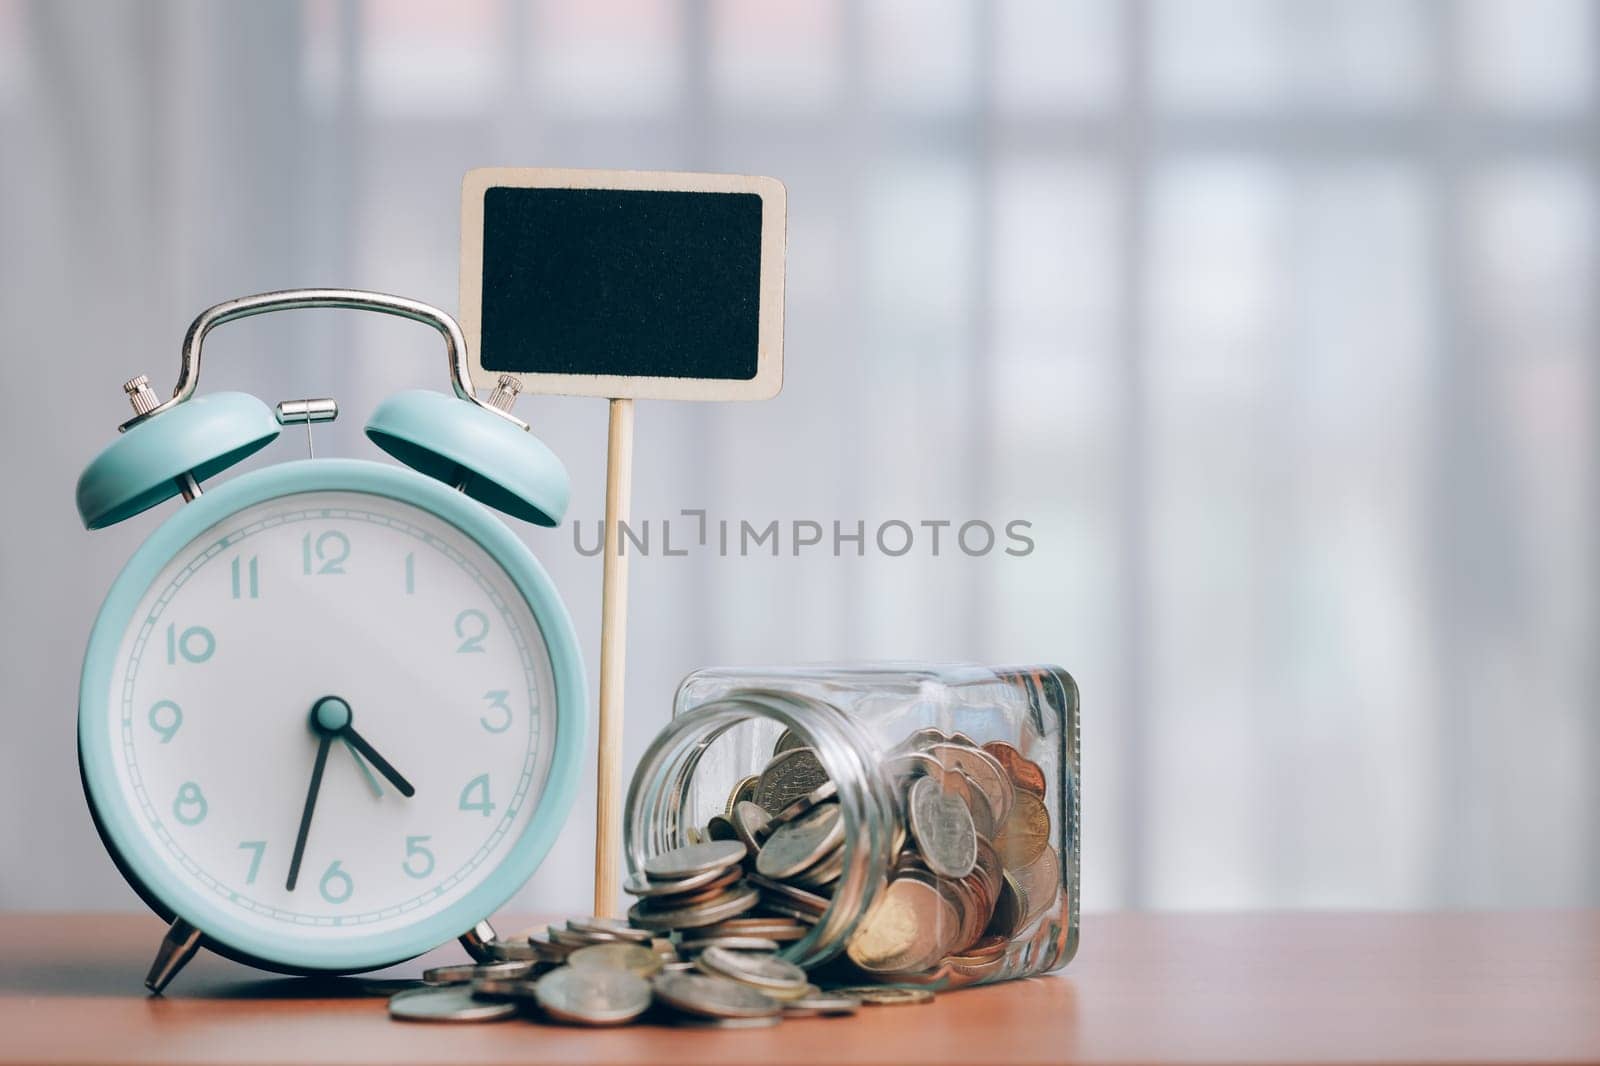 Alarm clock and coins on a wooden table, accompanied by a blank chalkboard for messages or notes, symbolizing the integration of time management and financial planning.